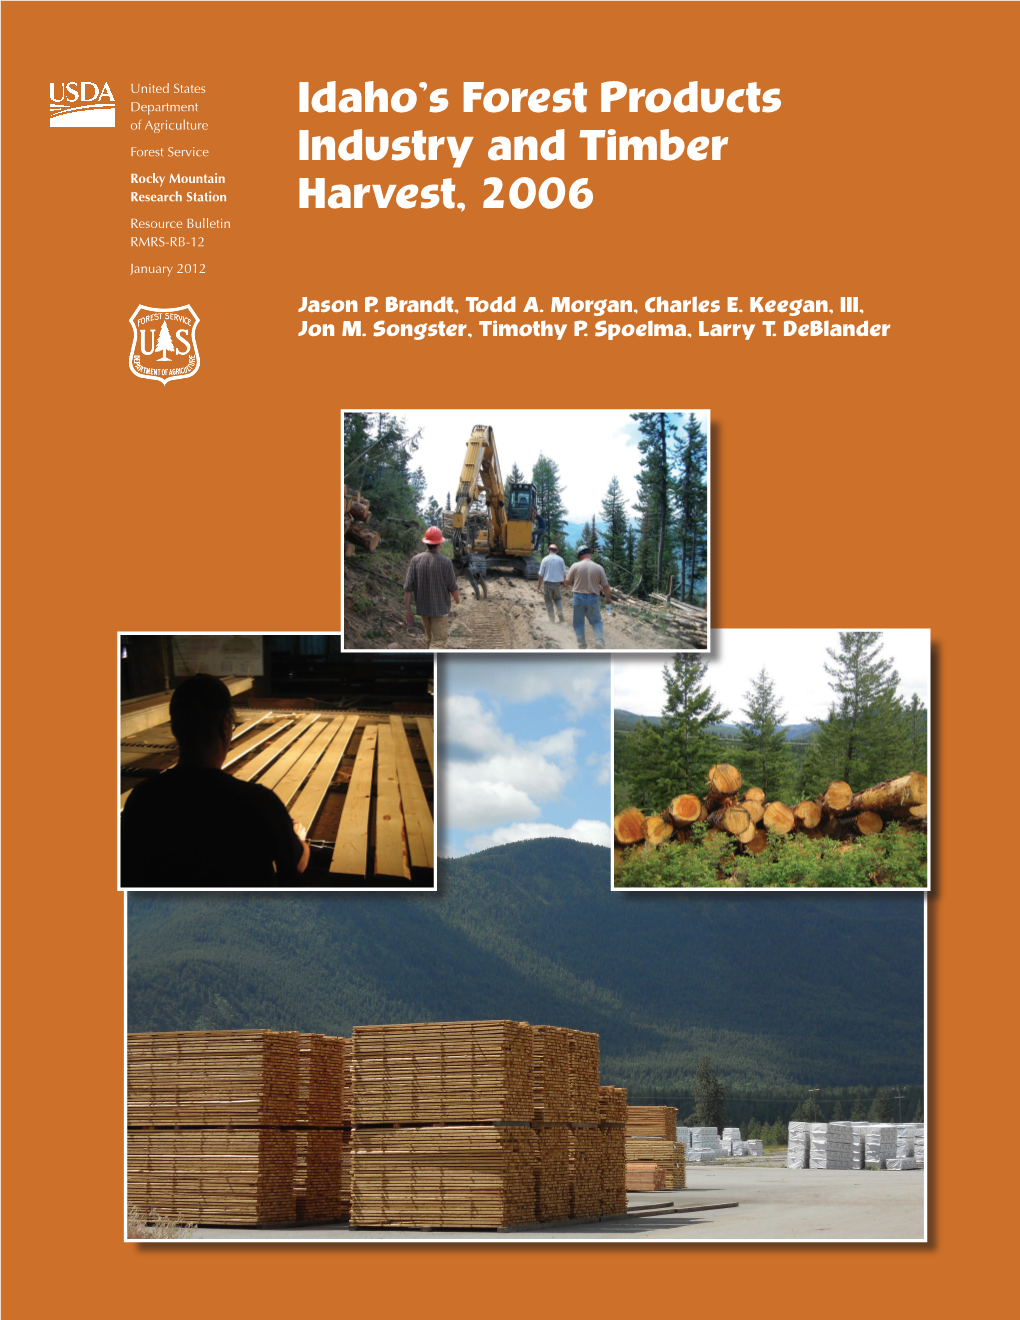 Idaho's Forest Products Industry and Timber Harvest, 2006